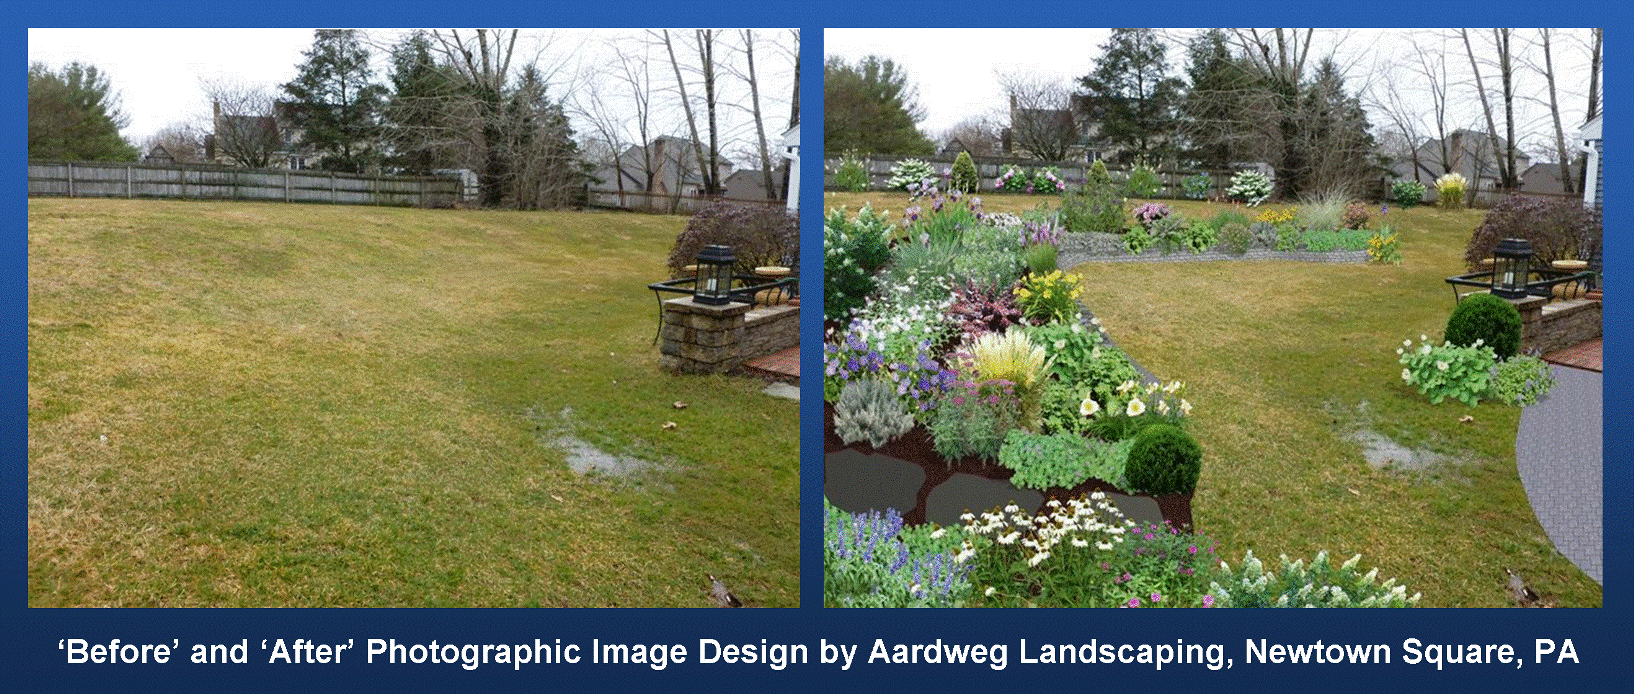 ‘Before’ and ‘After’ Photographic Image Design by Aardweg Landscaping, Newtown Square, PA 3 - Copy